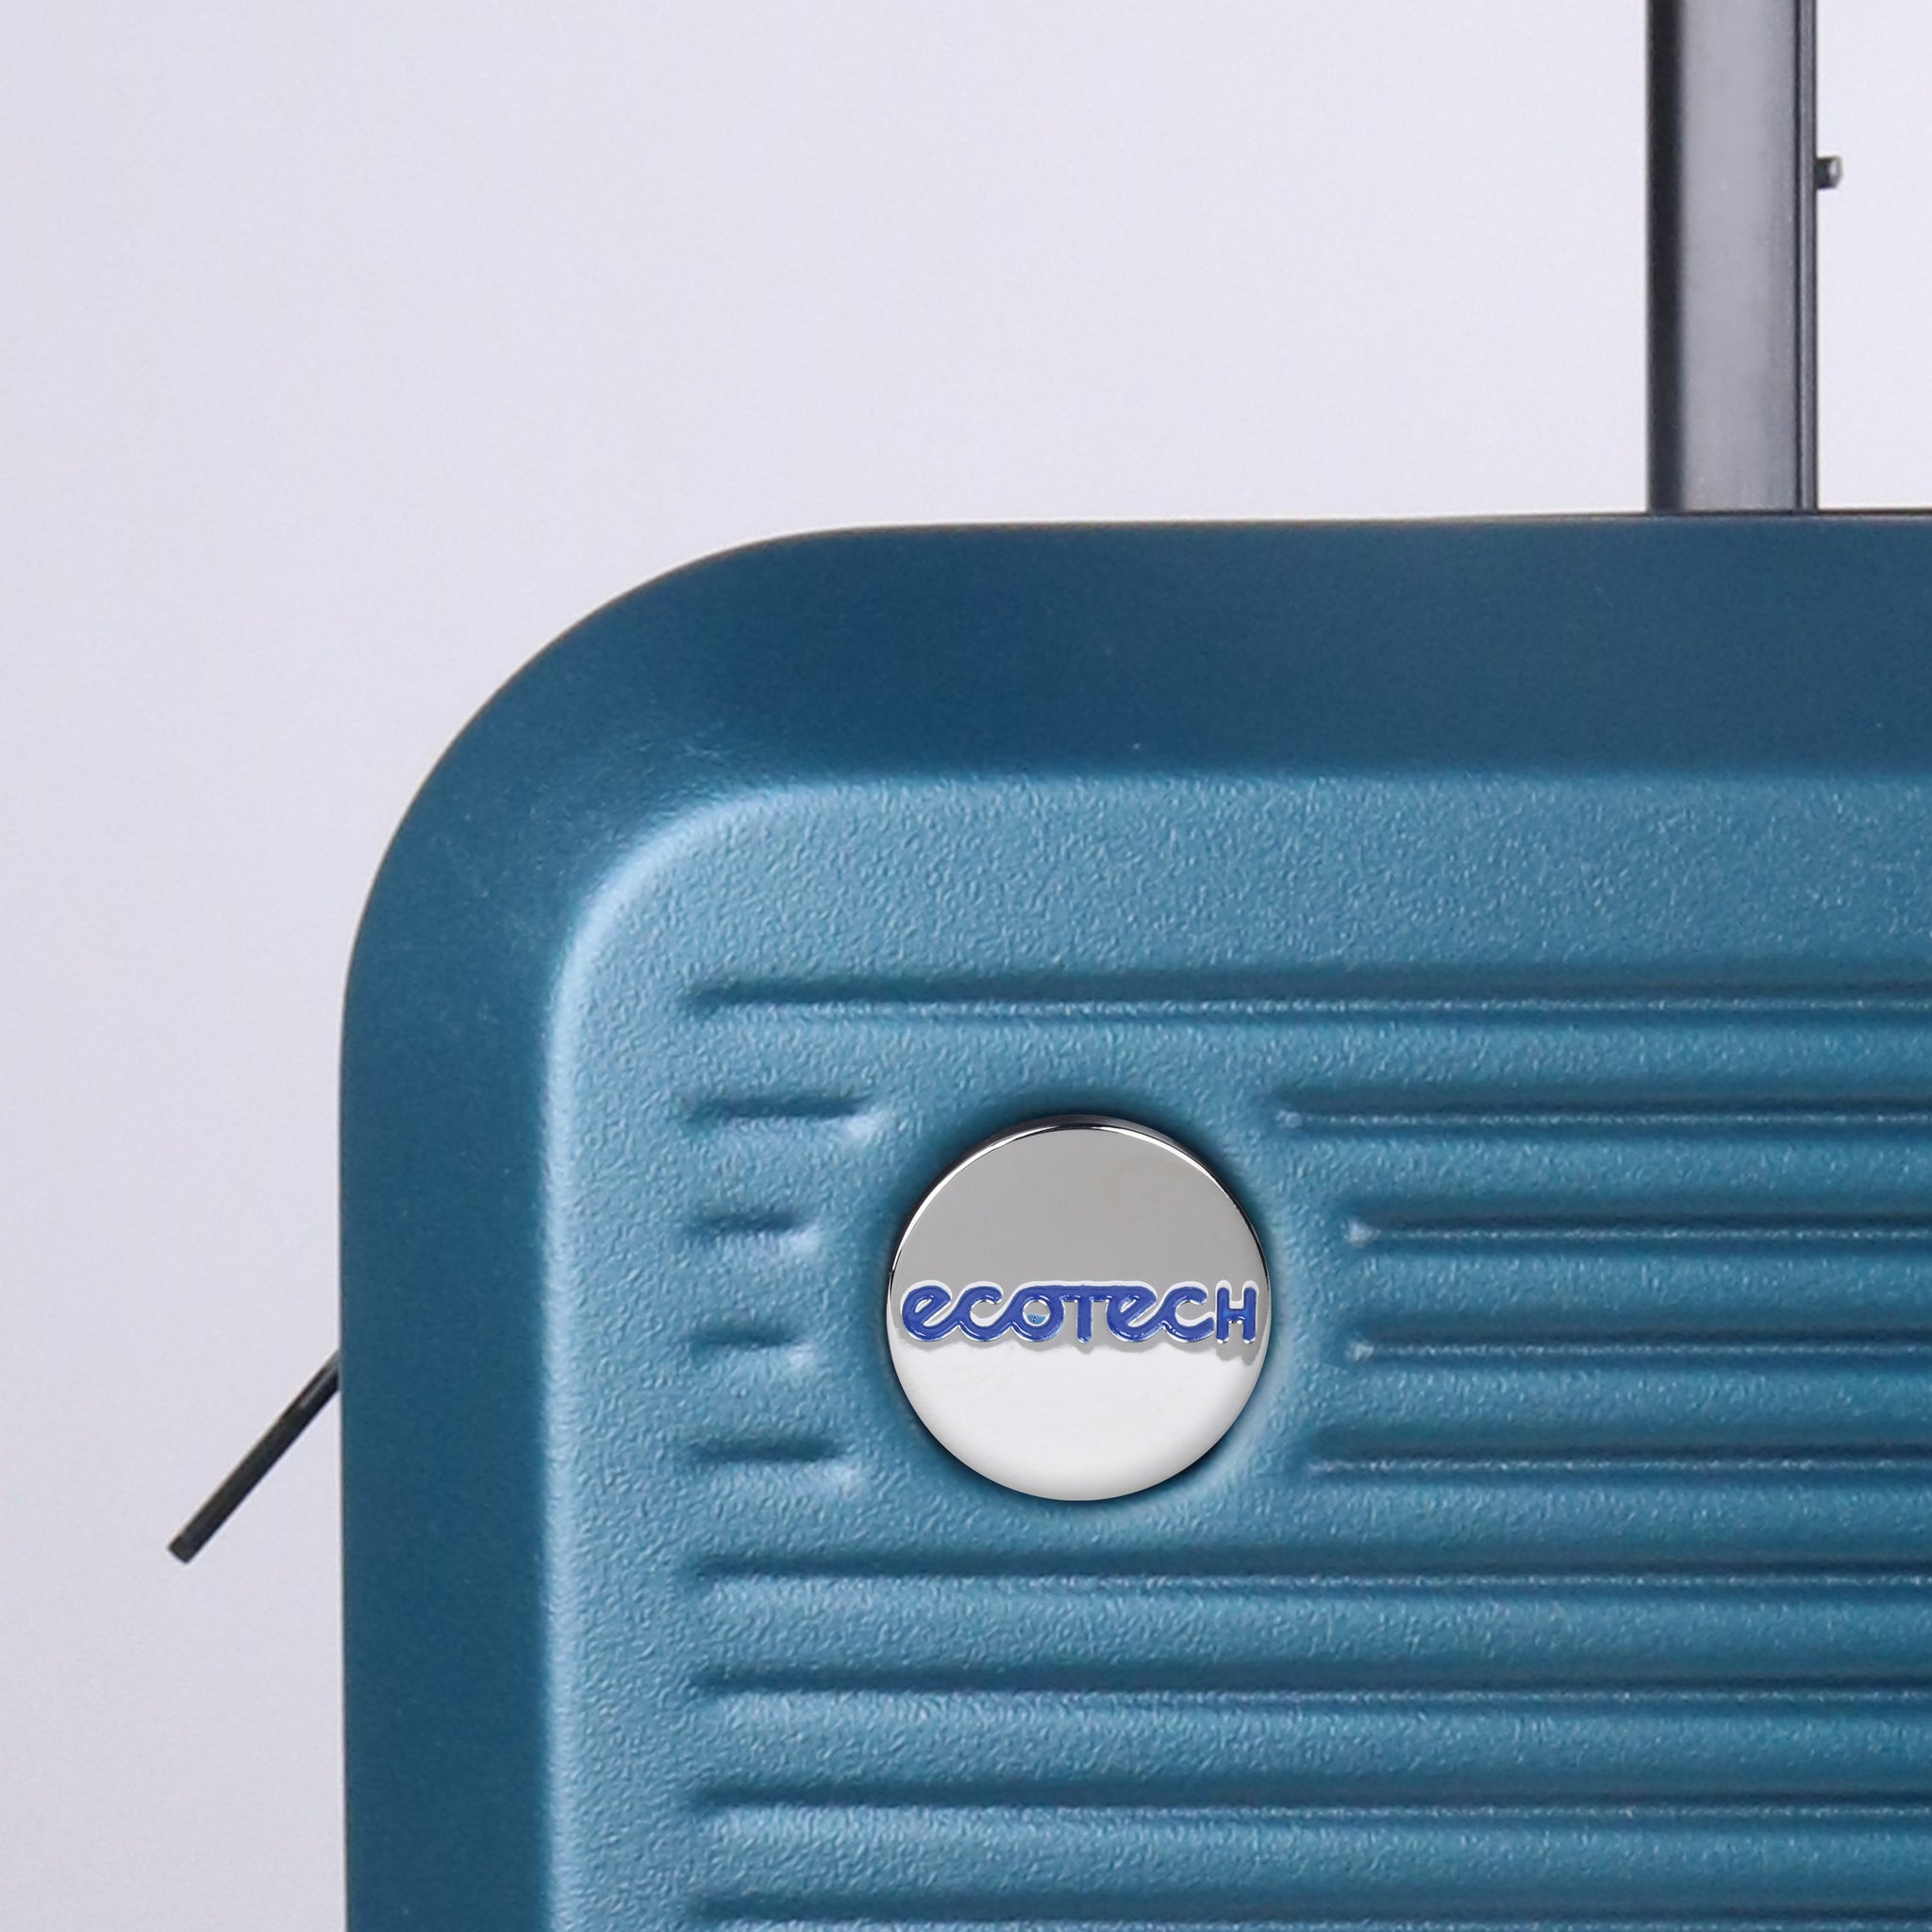 ECOTECH SPINNER CARRY ON LUGGAGE, TEAL